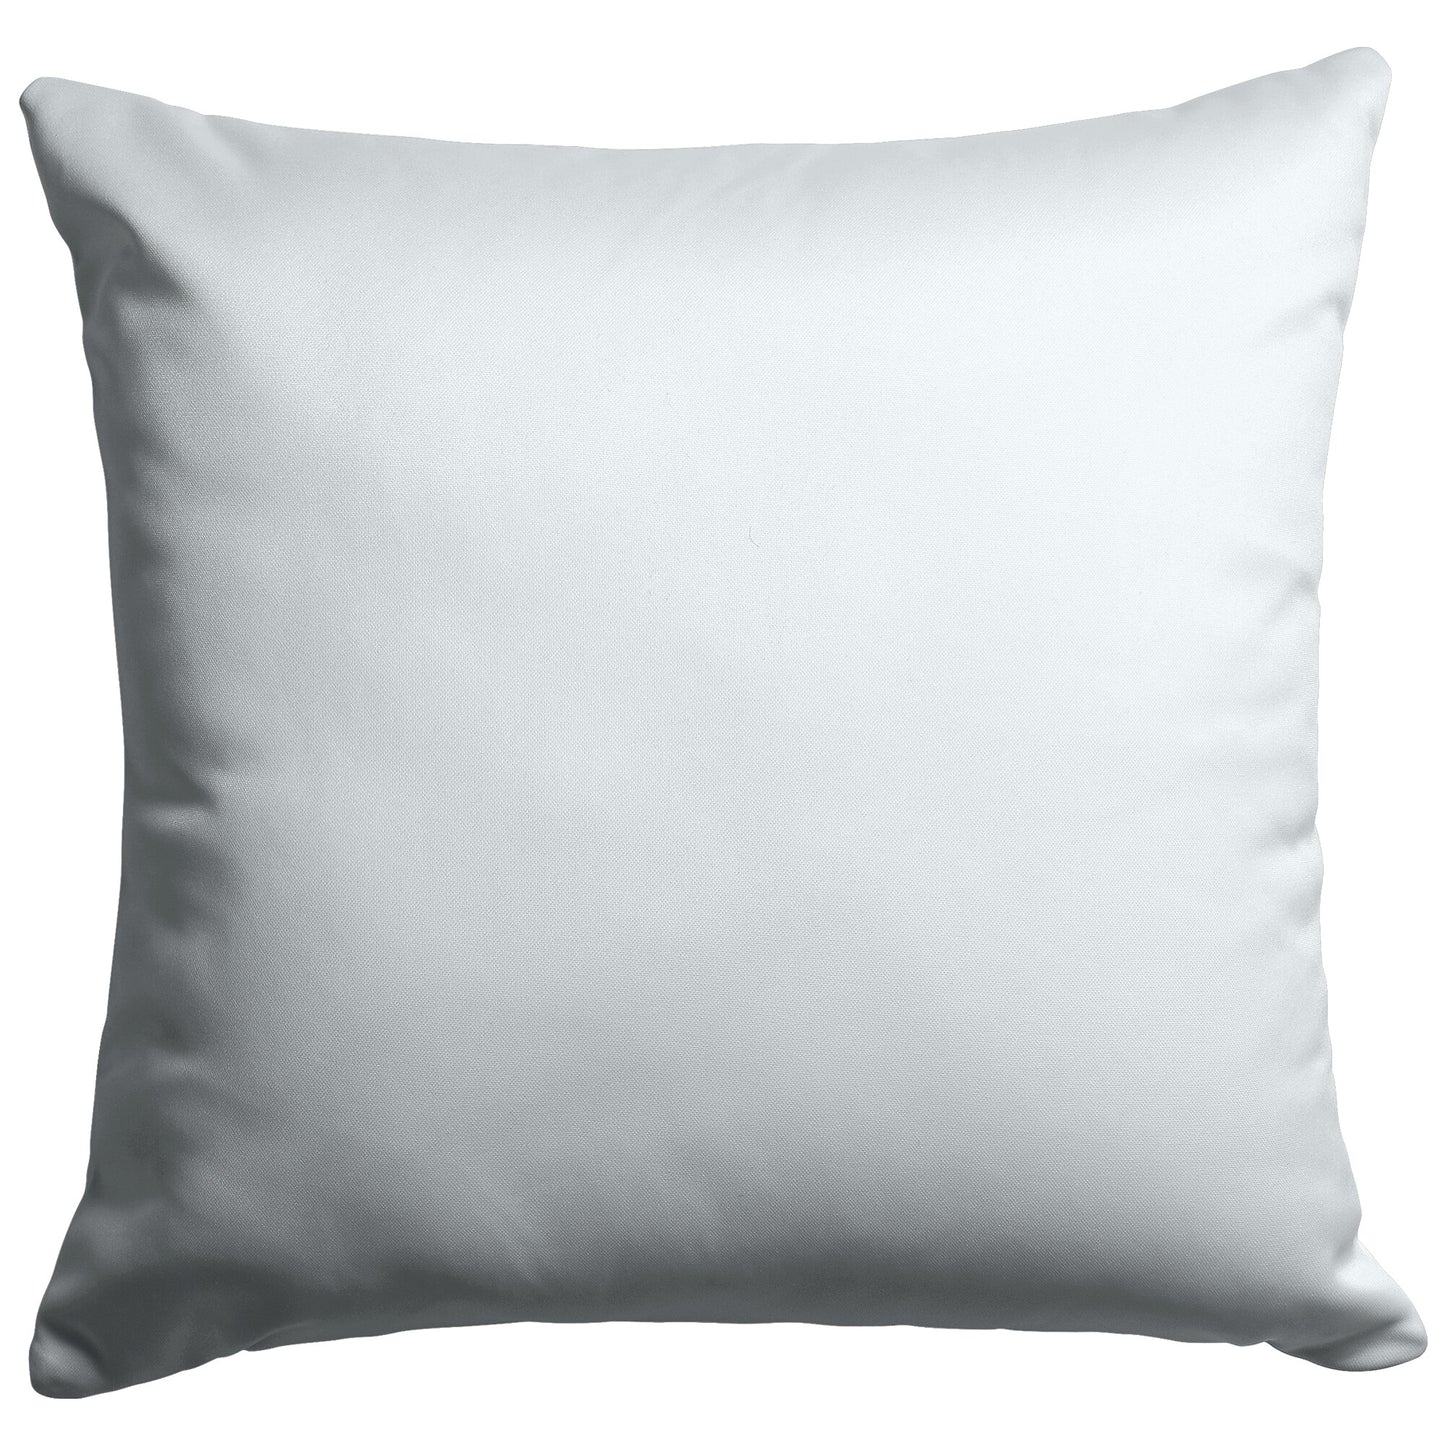 I Love Christmas! Pillow With Light Blue Accent - Signs and Seasons Gifts